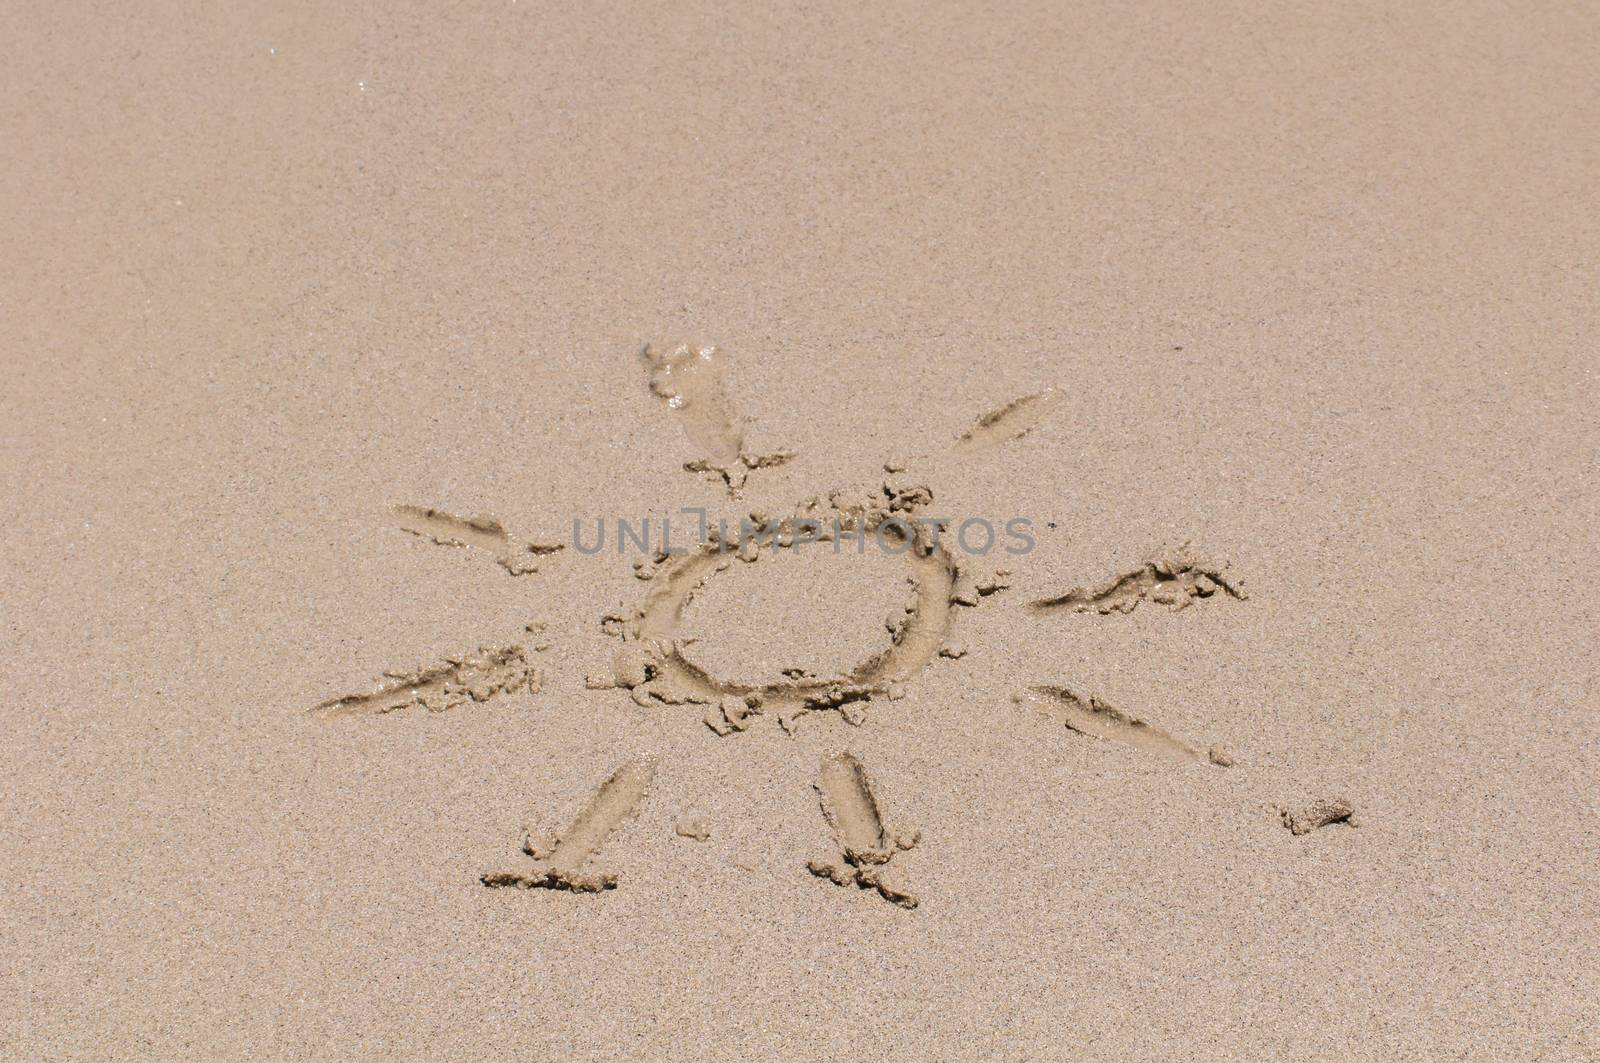 Sun drawing on the sand